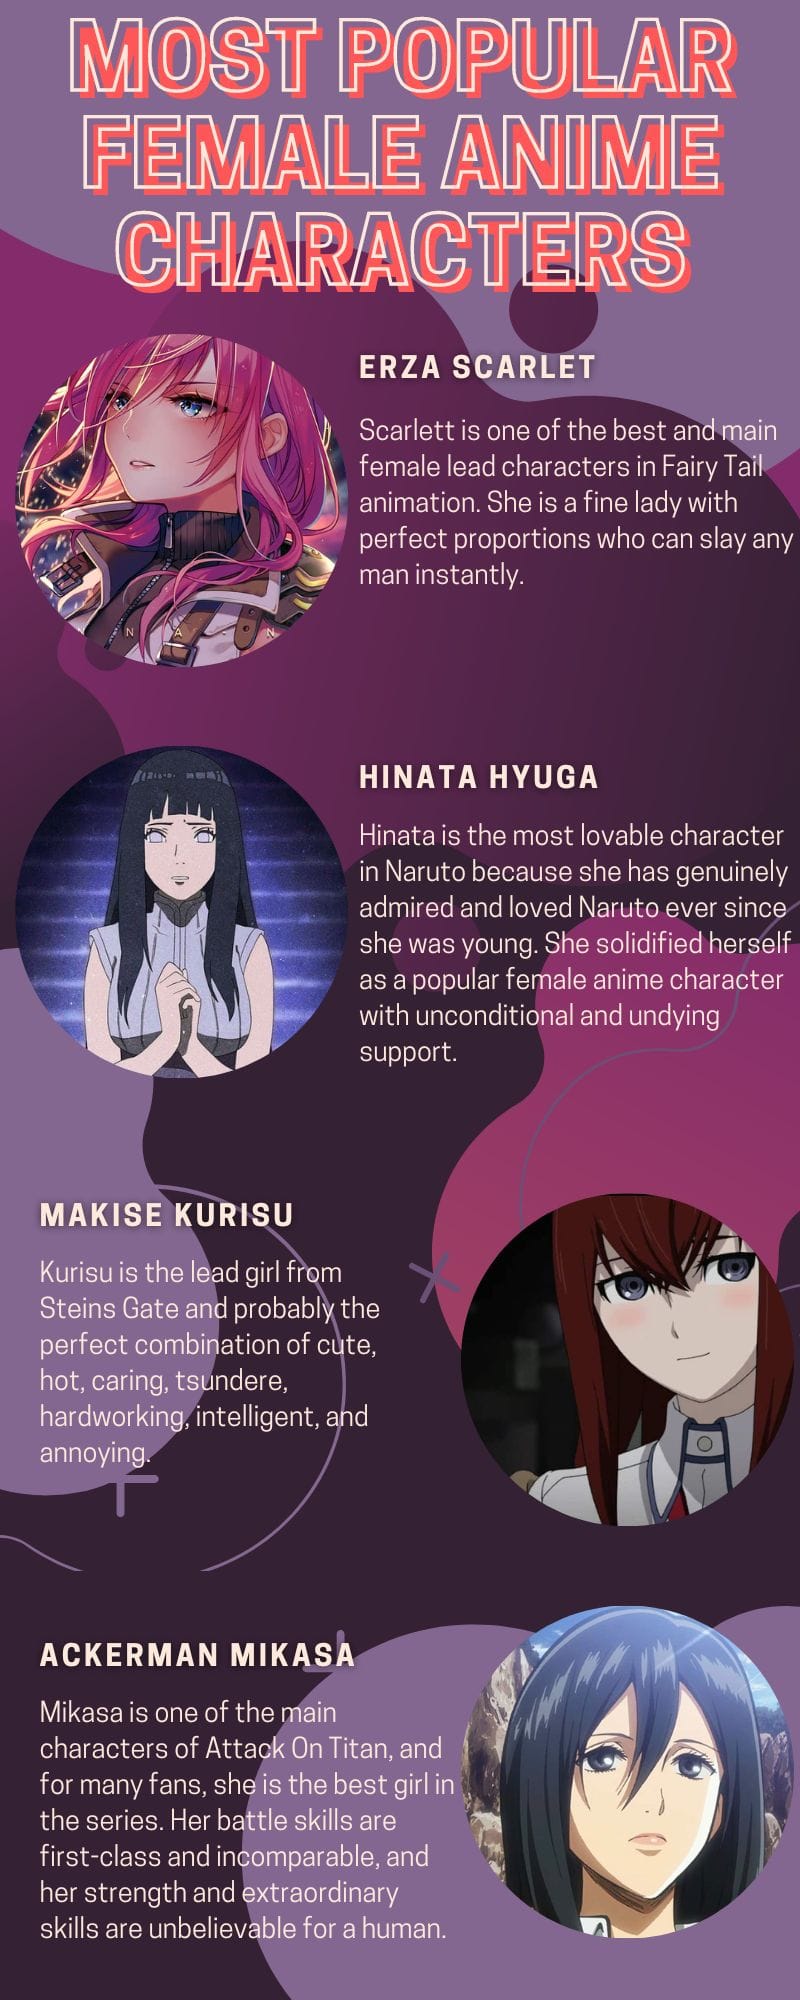 Top 8 most attractive female anime characters based on fan votes on Ranker